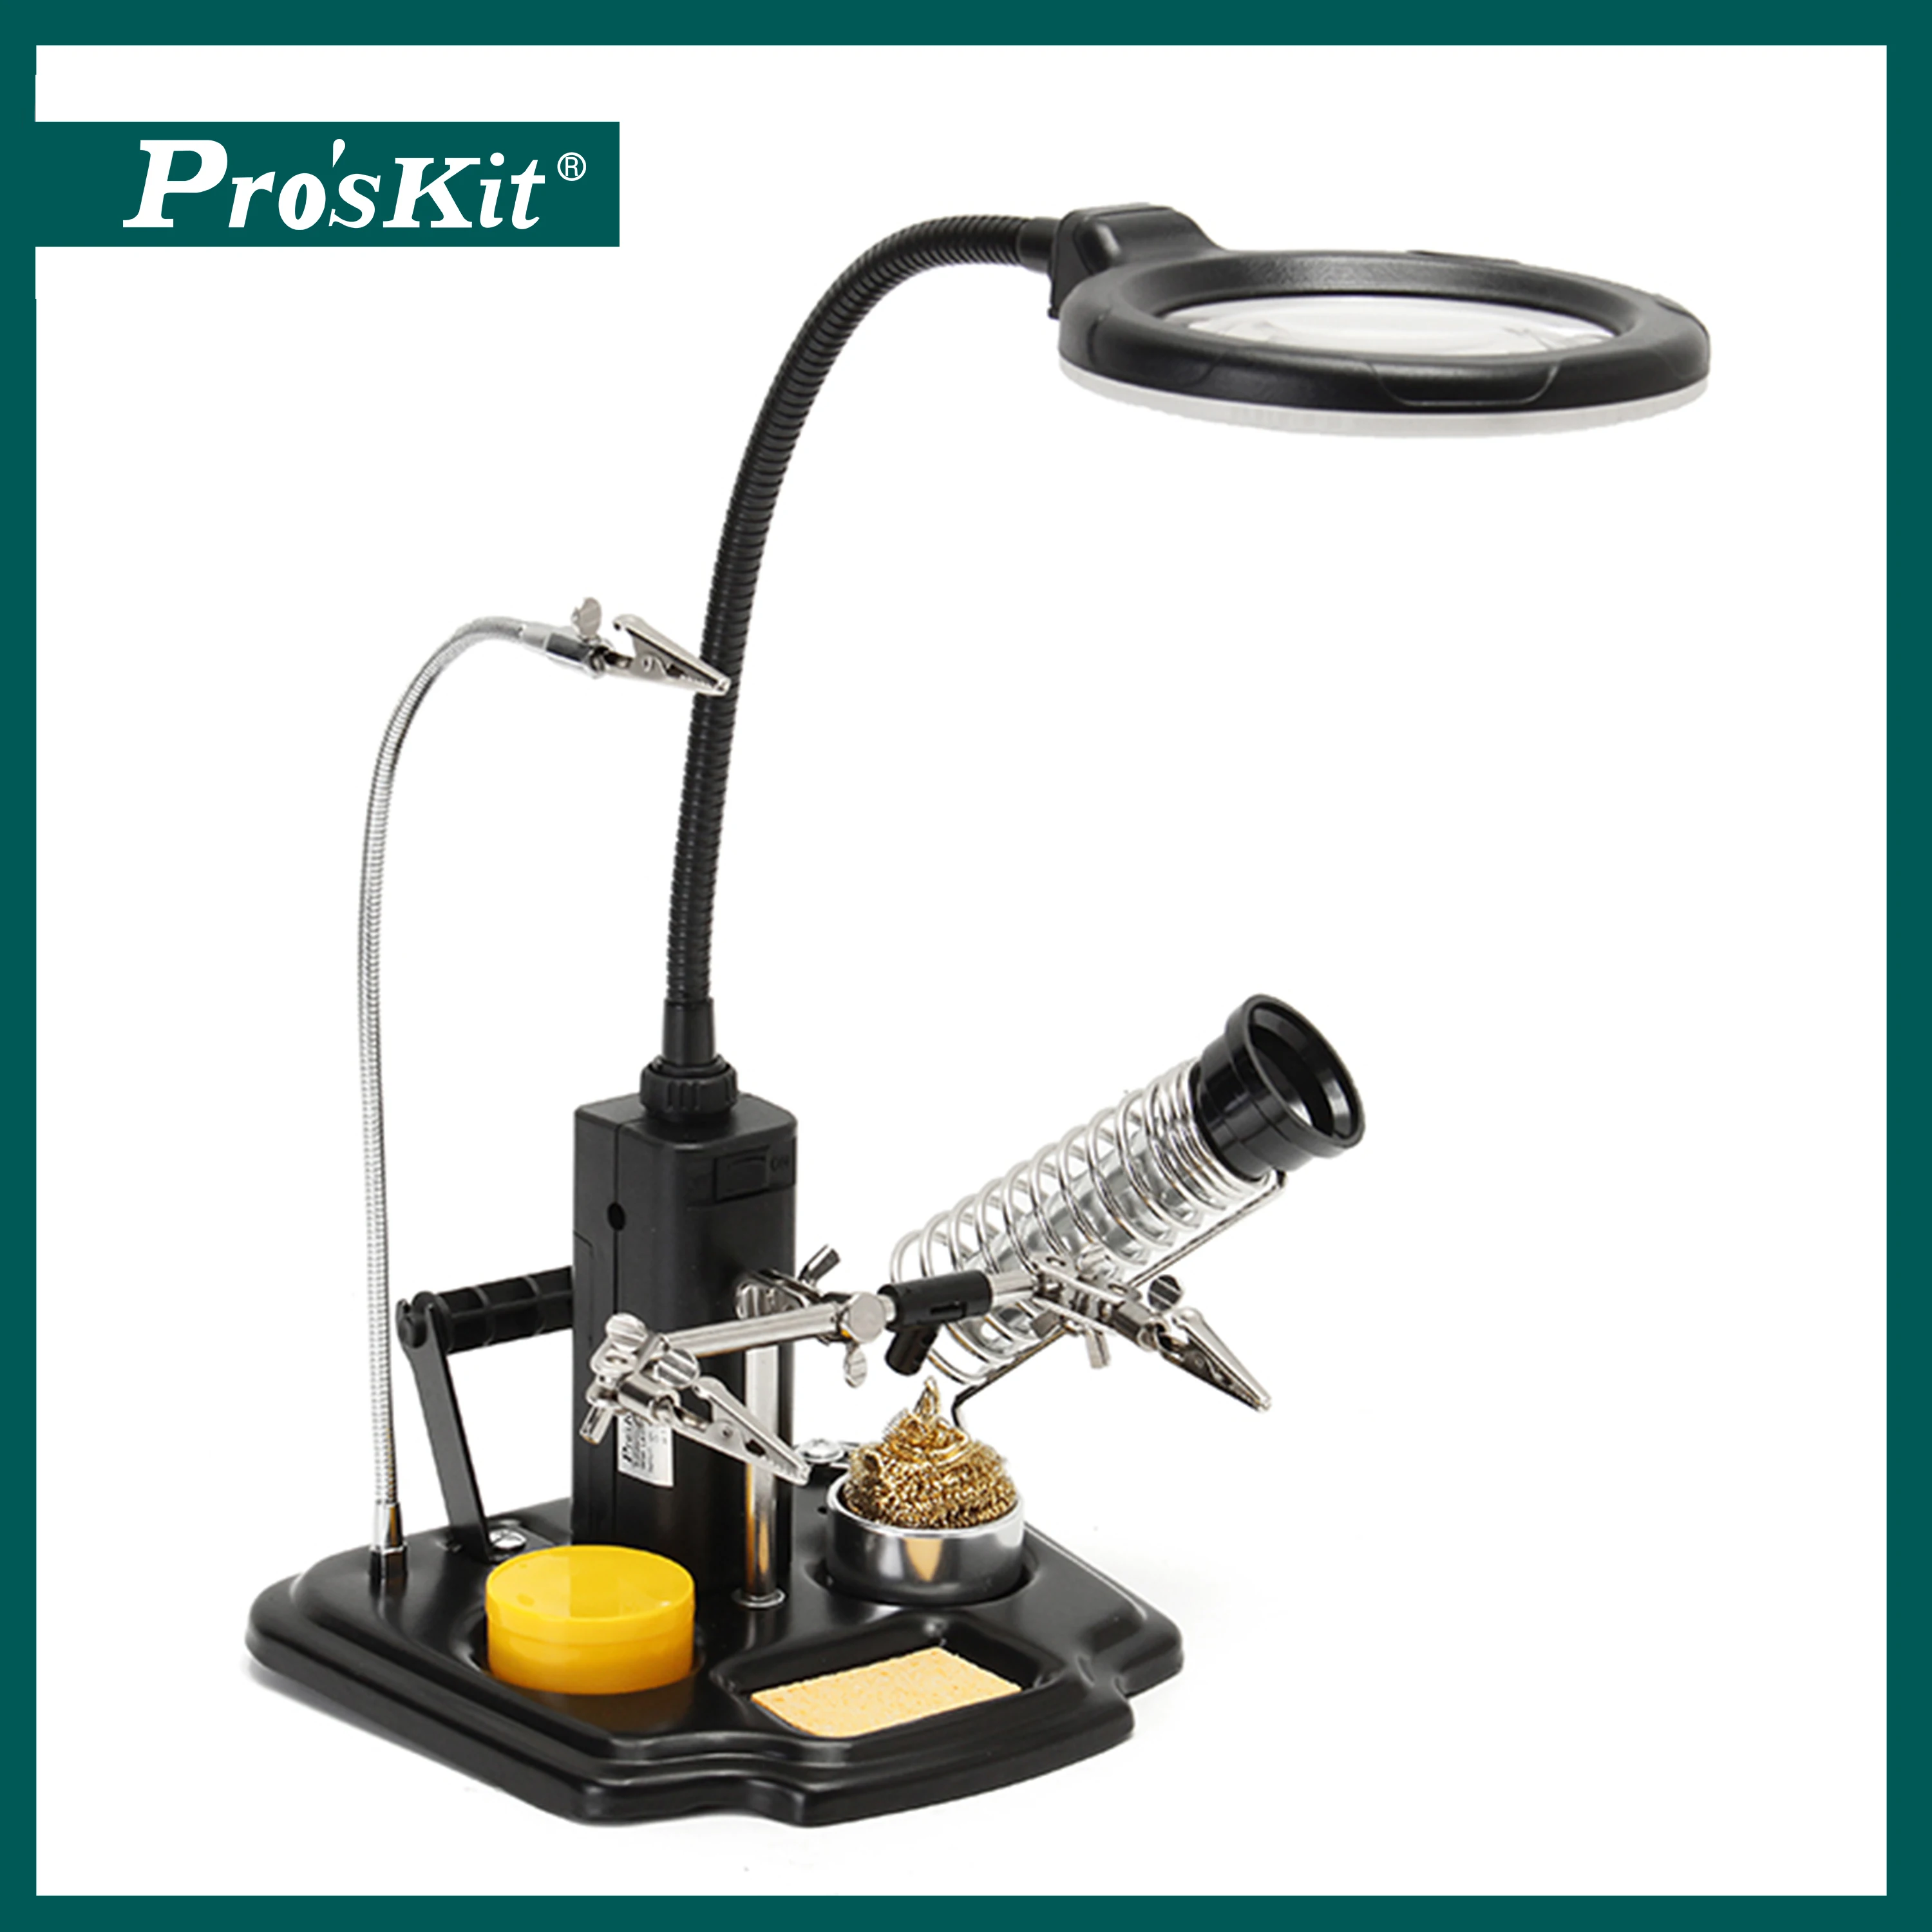 pro'skit-sn-396-soldering-desk-lamp-with-led-magnifying-glass-magnifier-stand-holder-microscope-for-mobile-phone-repair-welding